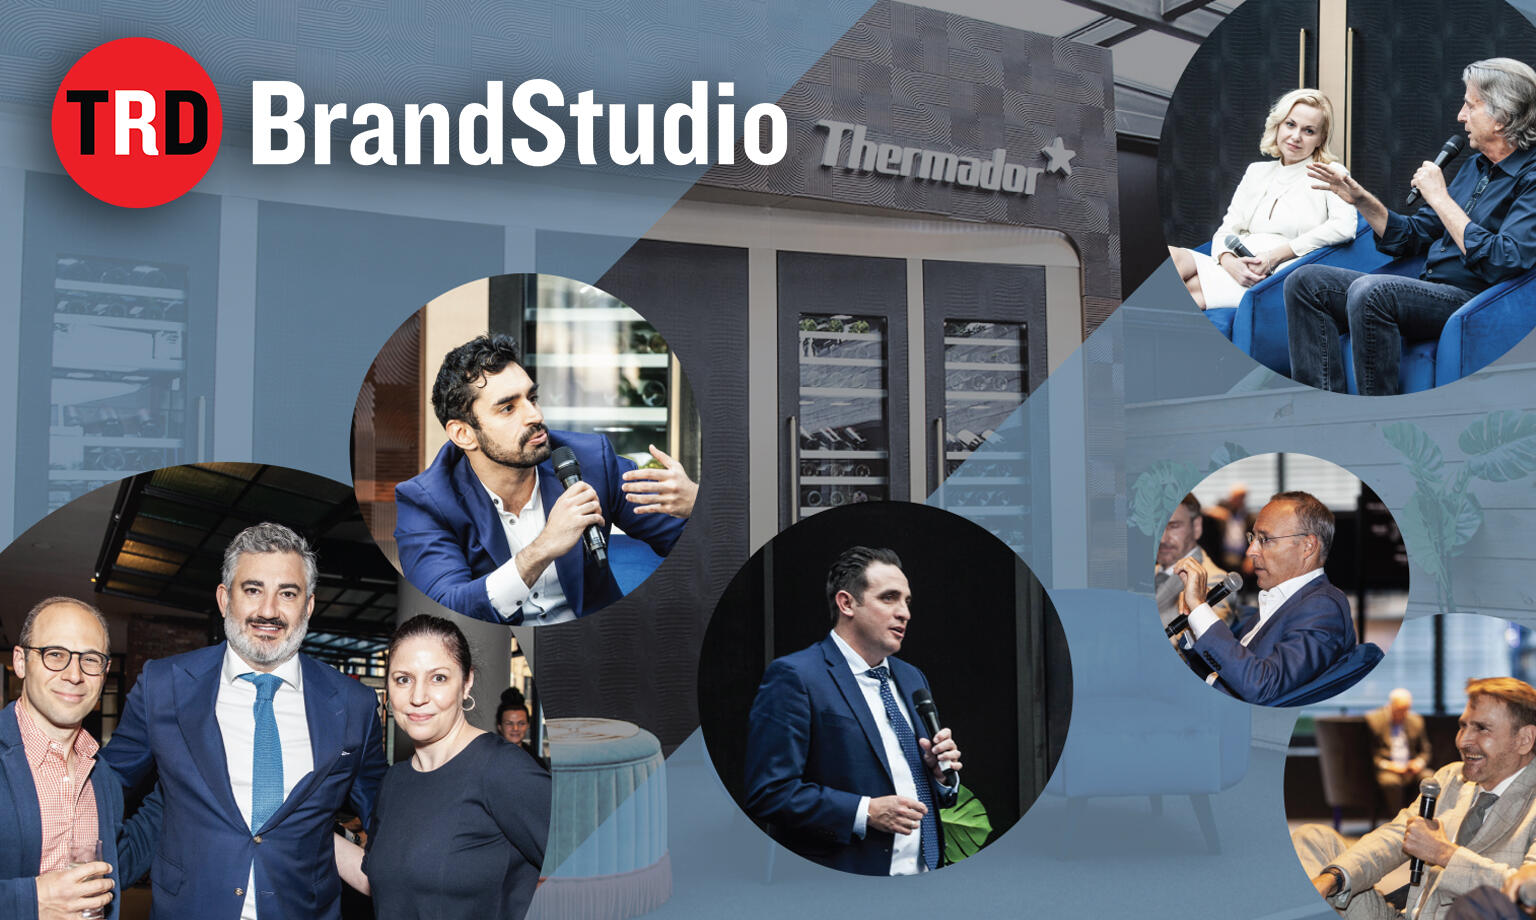 Capitalize on an event-ful summer with TRD Brand Studio